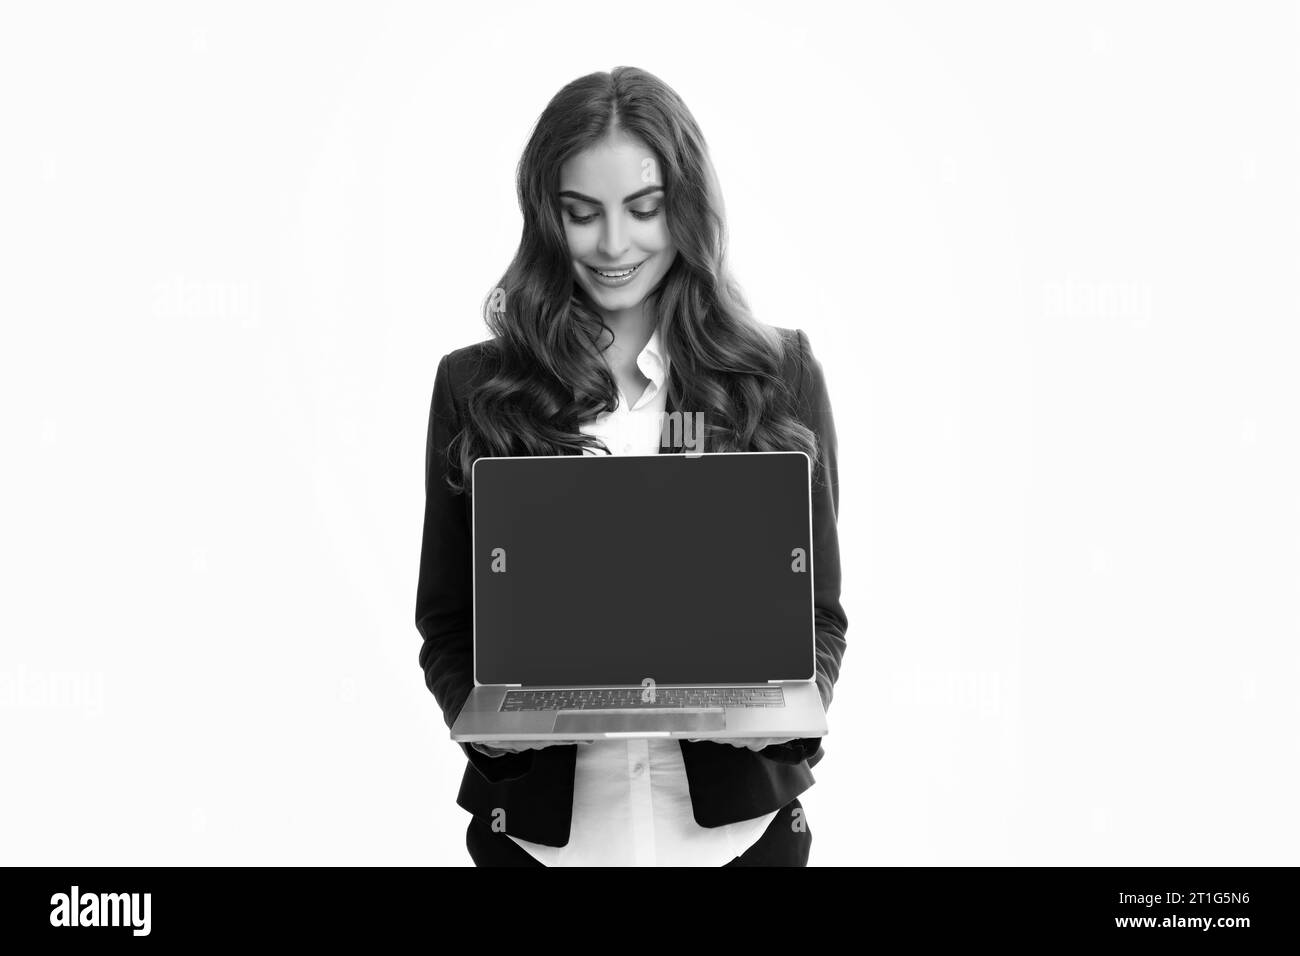 Portrait of young businesswoman using laptop computer isolated on gray background. Business women in suit excited something in laptop screen. Portrait Stock Photo